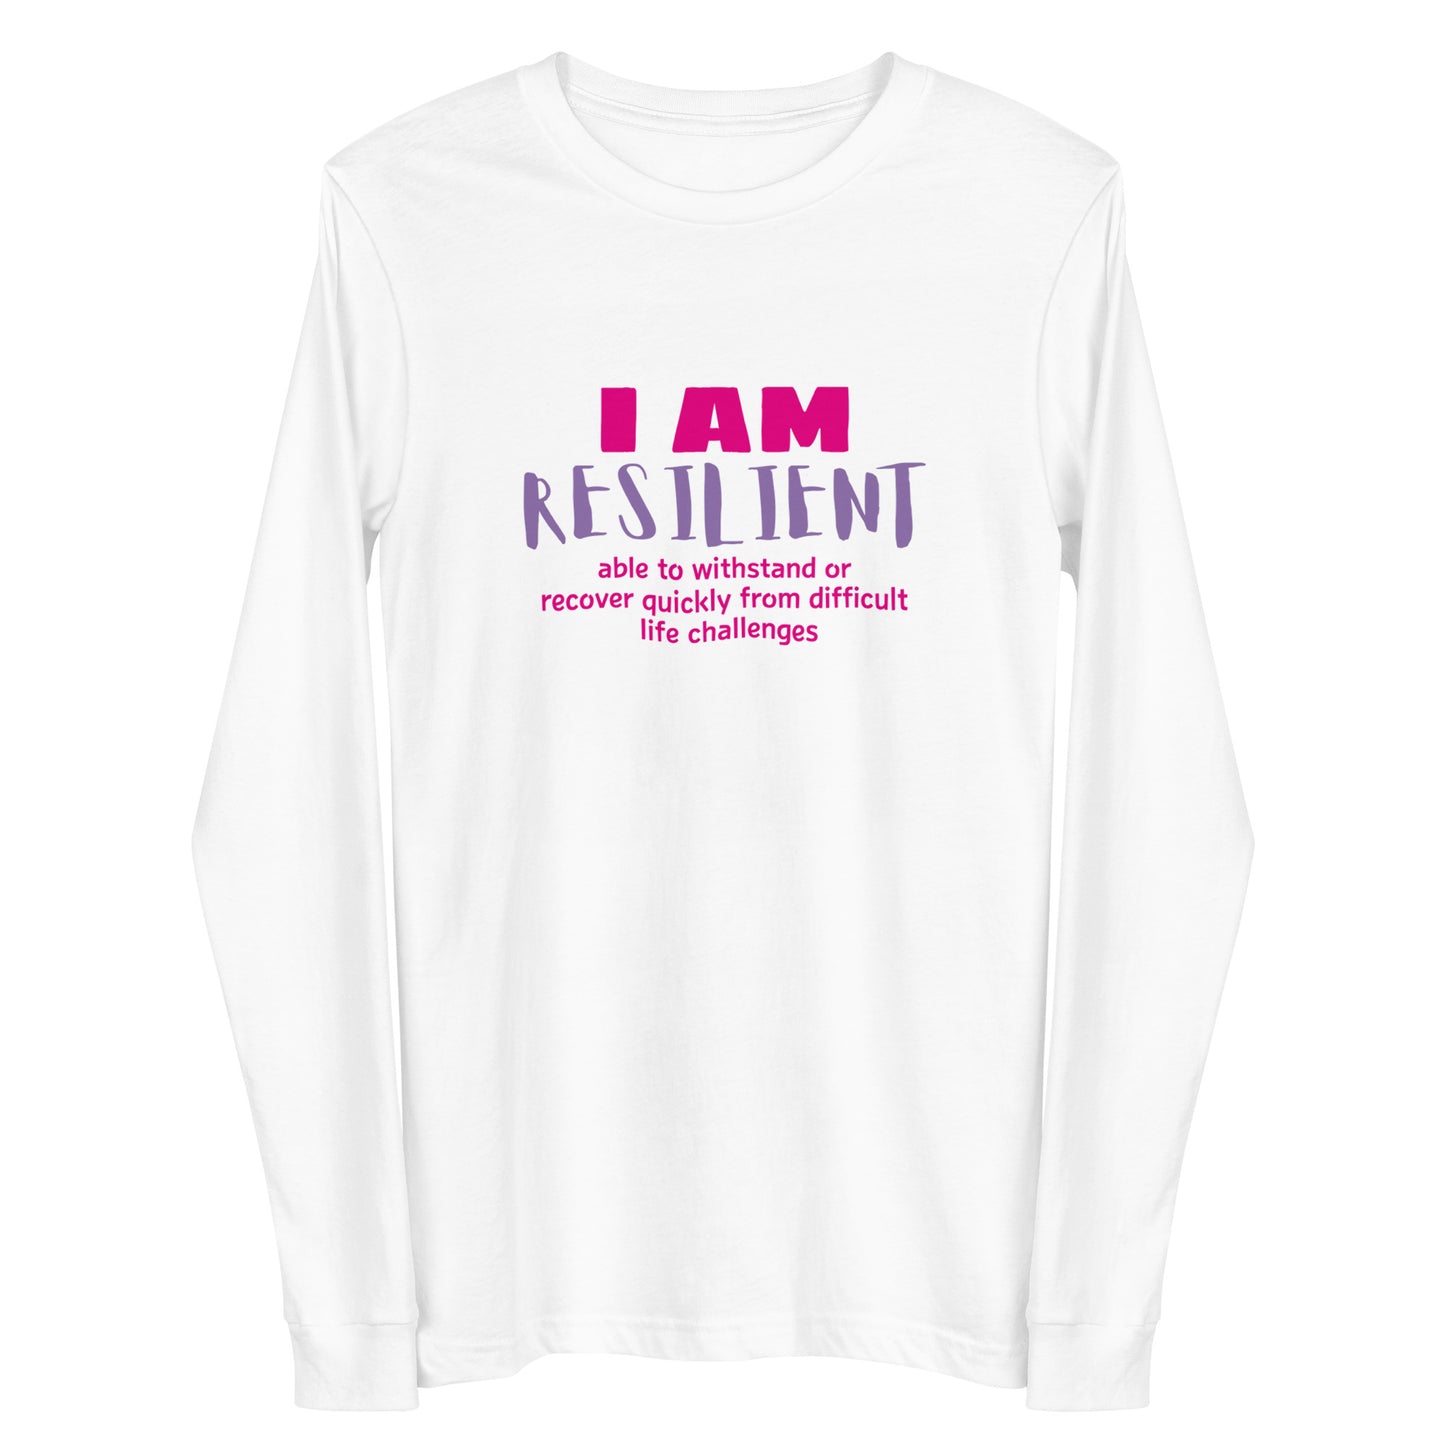 I AM Resilient Long Sleeve T-Shirt